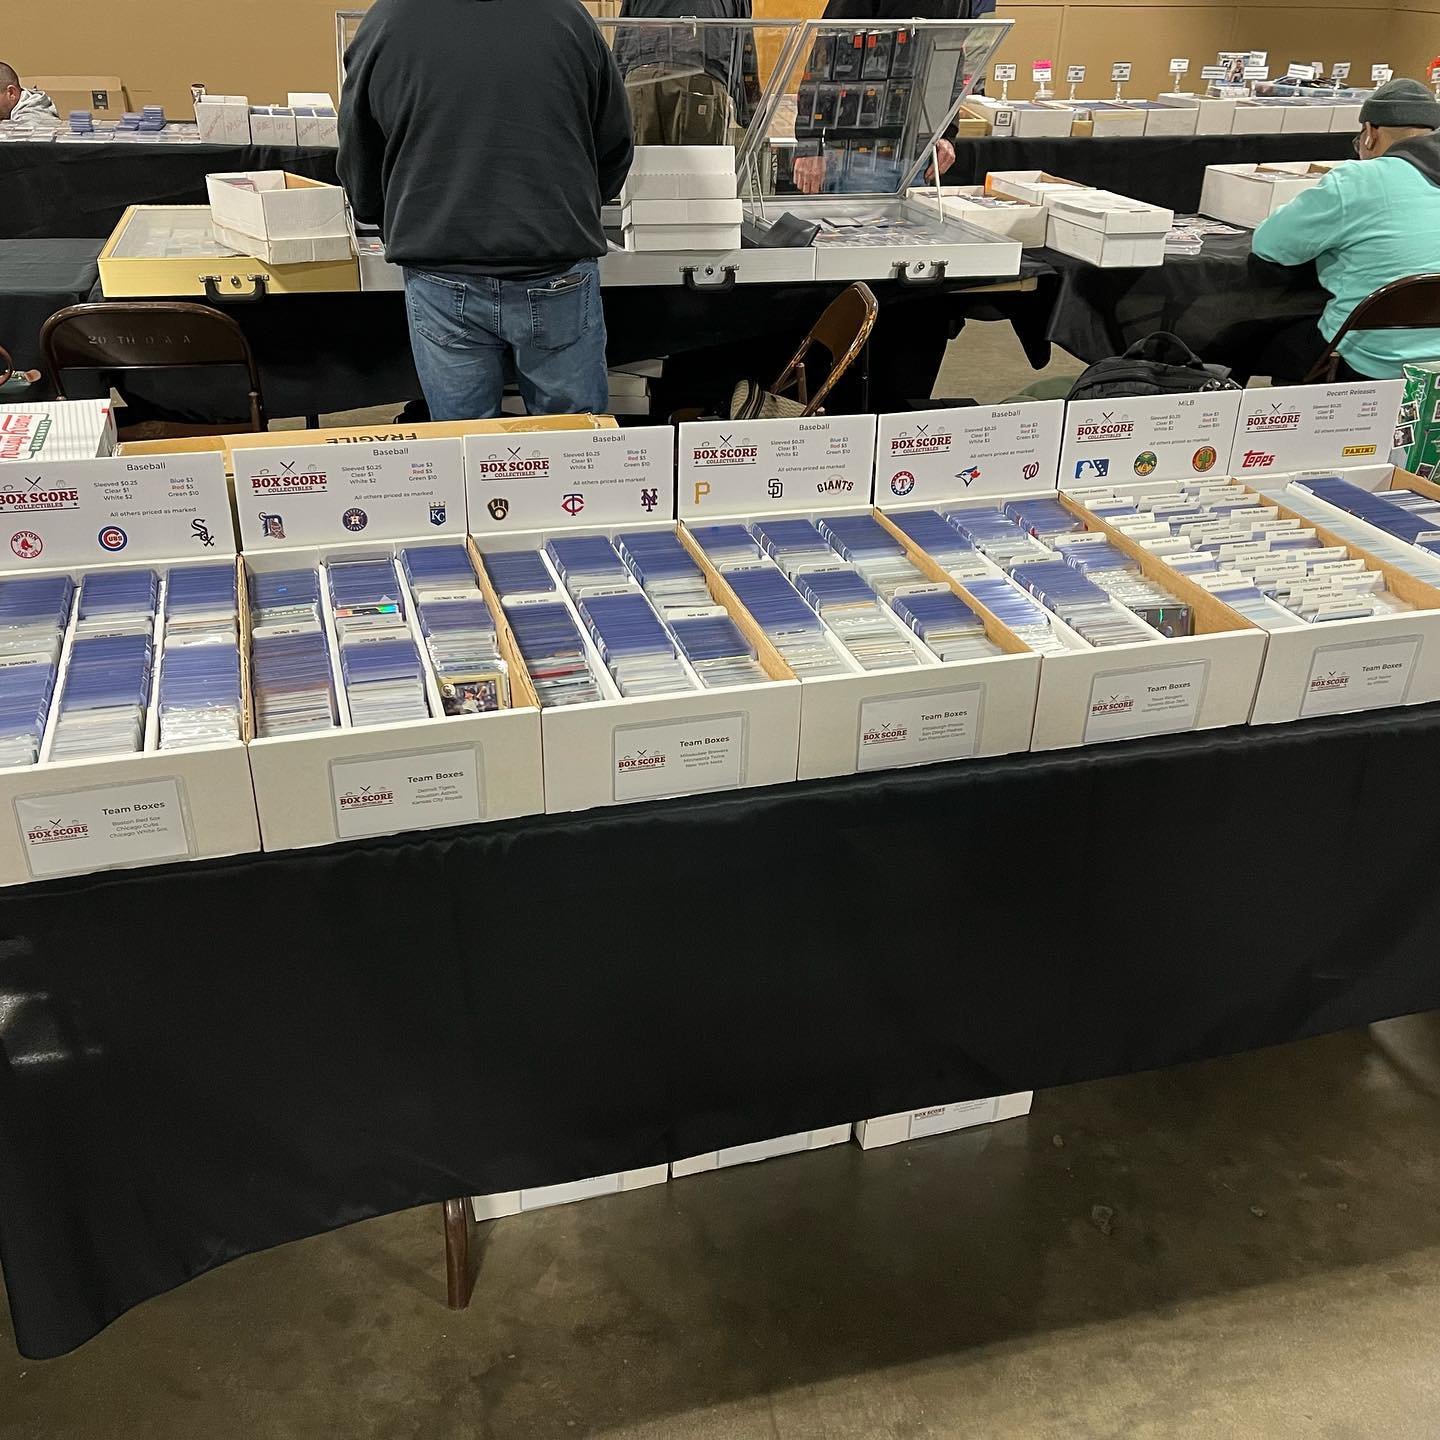 Almost 2 weeks ago we setup at the @auburntradingcardshow. We had a great time, met a lot of fantastic collectors and saw some old friends! We hope to go the same this weekend in Phoenix! 

Thanks to the guys who run the Auburn Trading Card Show for 